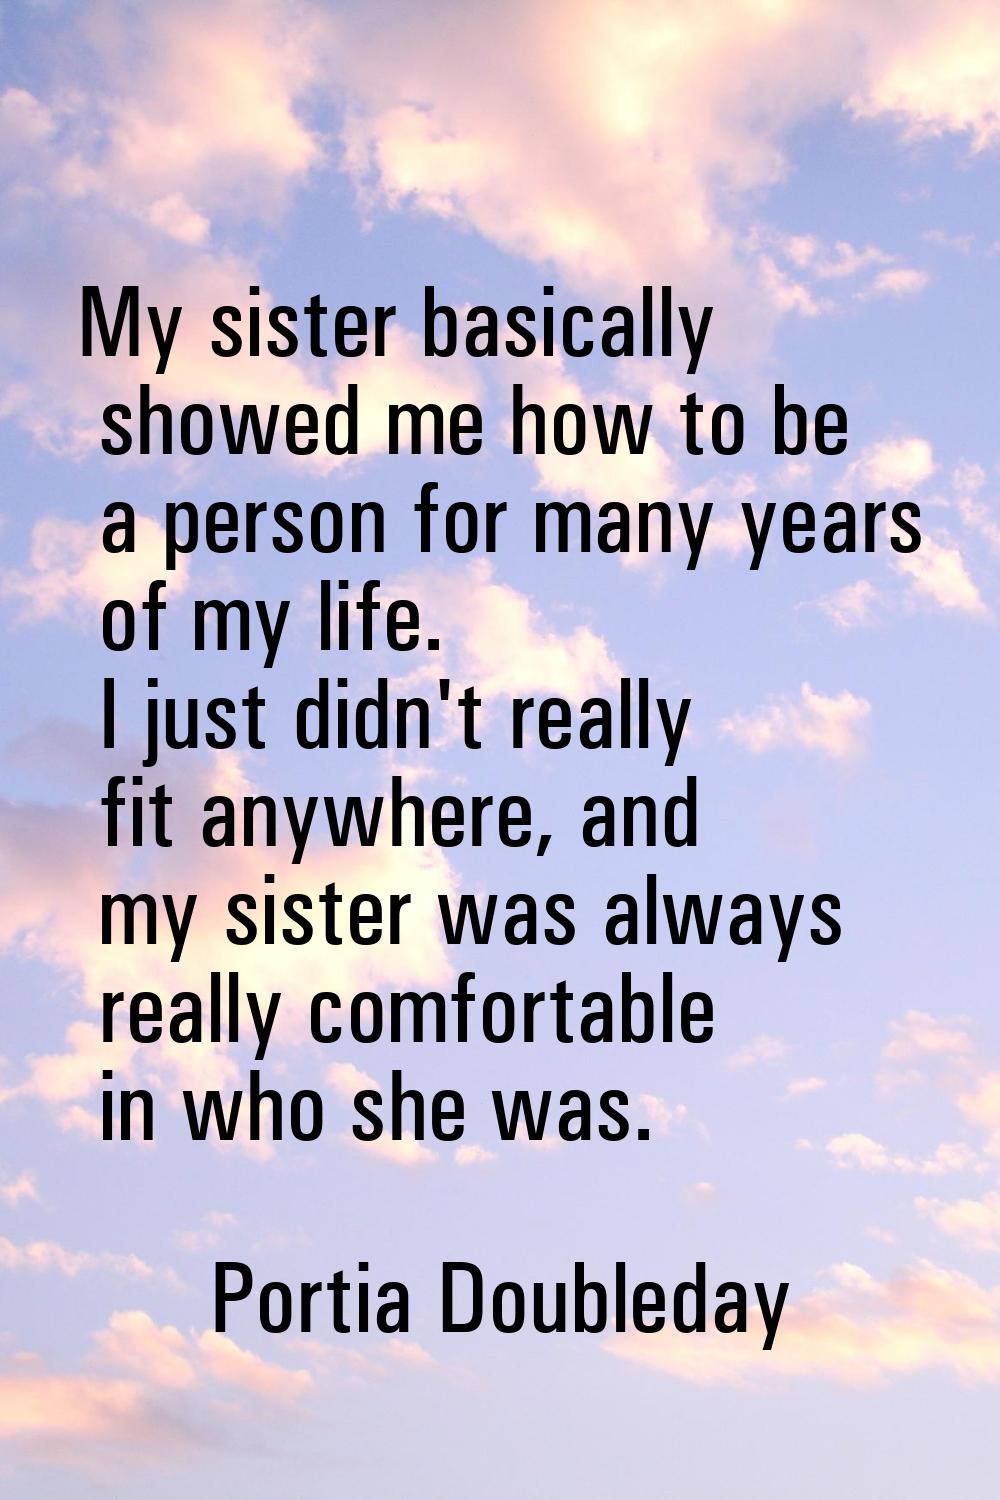 My sister basically showed me how to be a person for many years of my life. I just didn't really fi